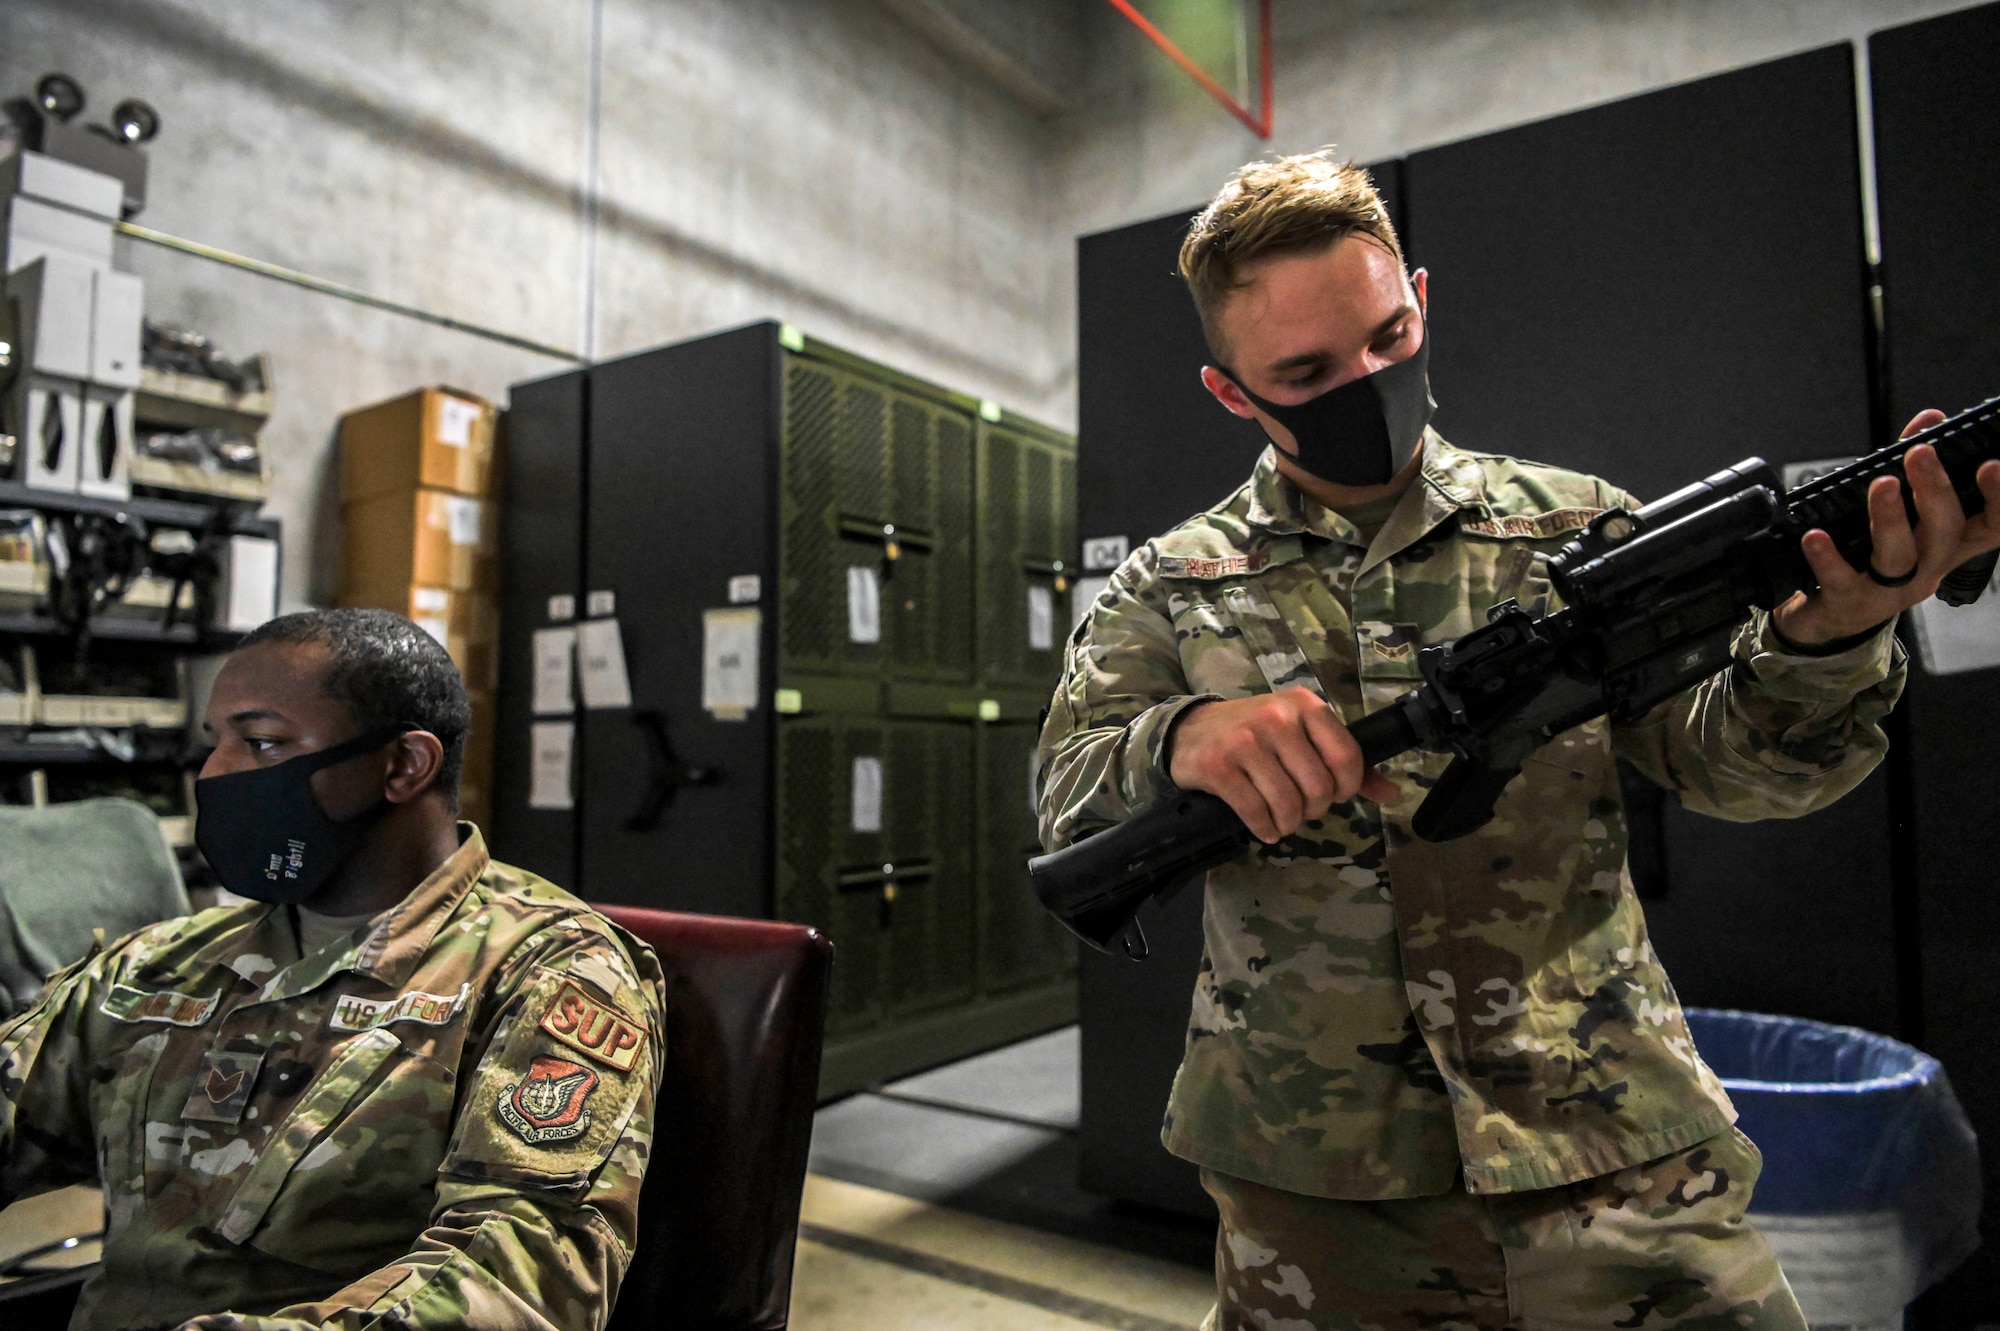 Airmen record the serial number of an issued weapon